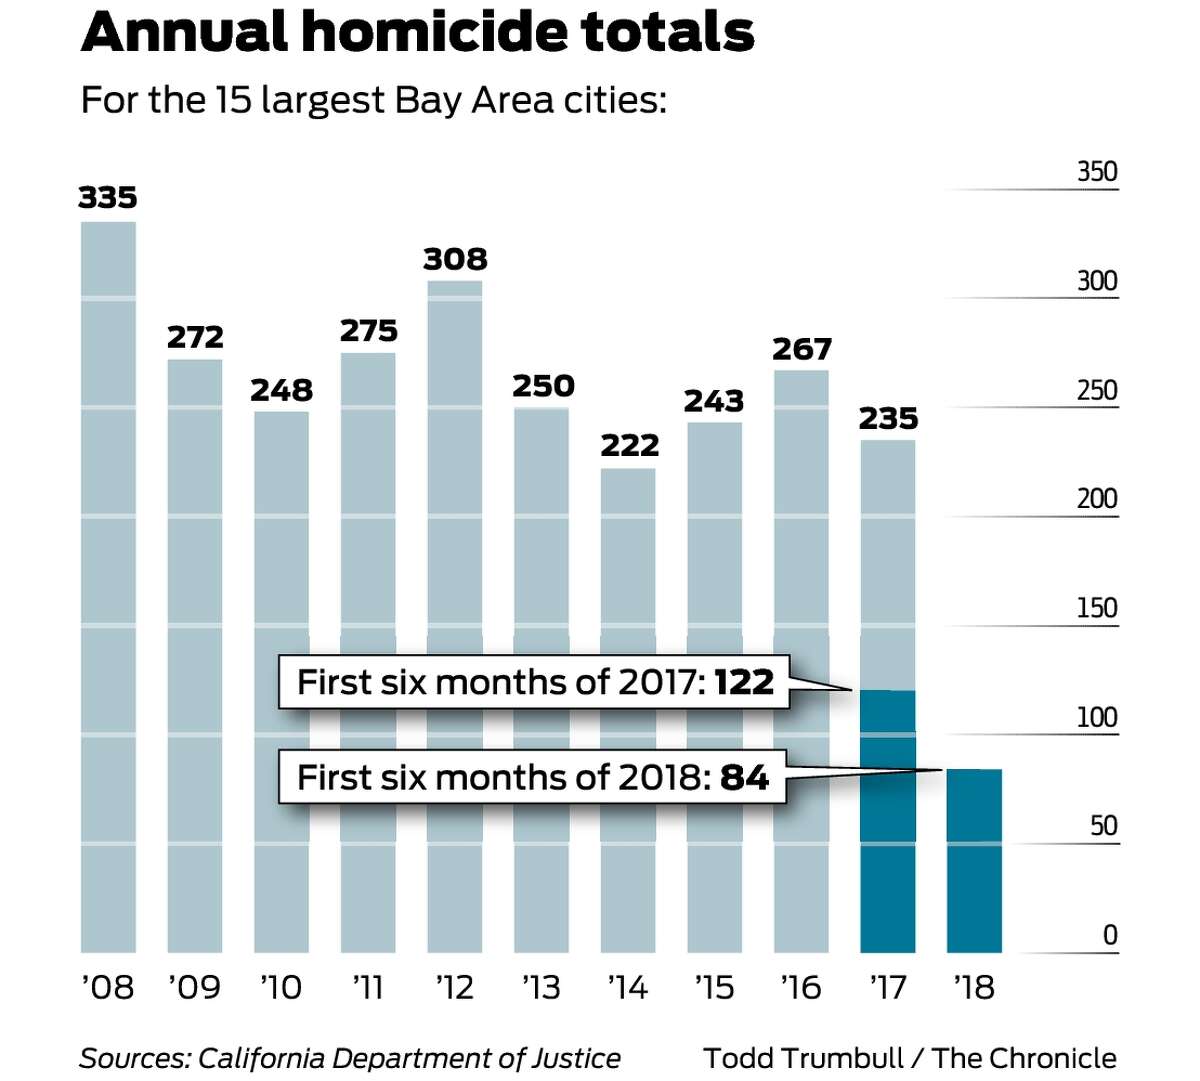 Bay Area homicides plunge to historic lows in first half of 2018